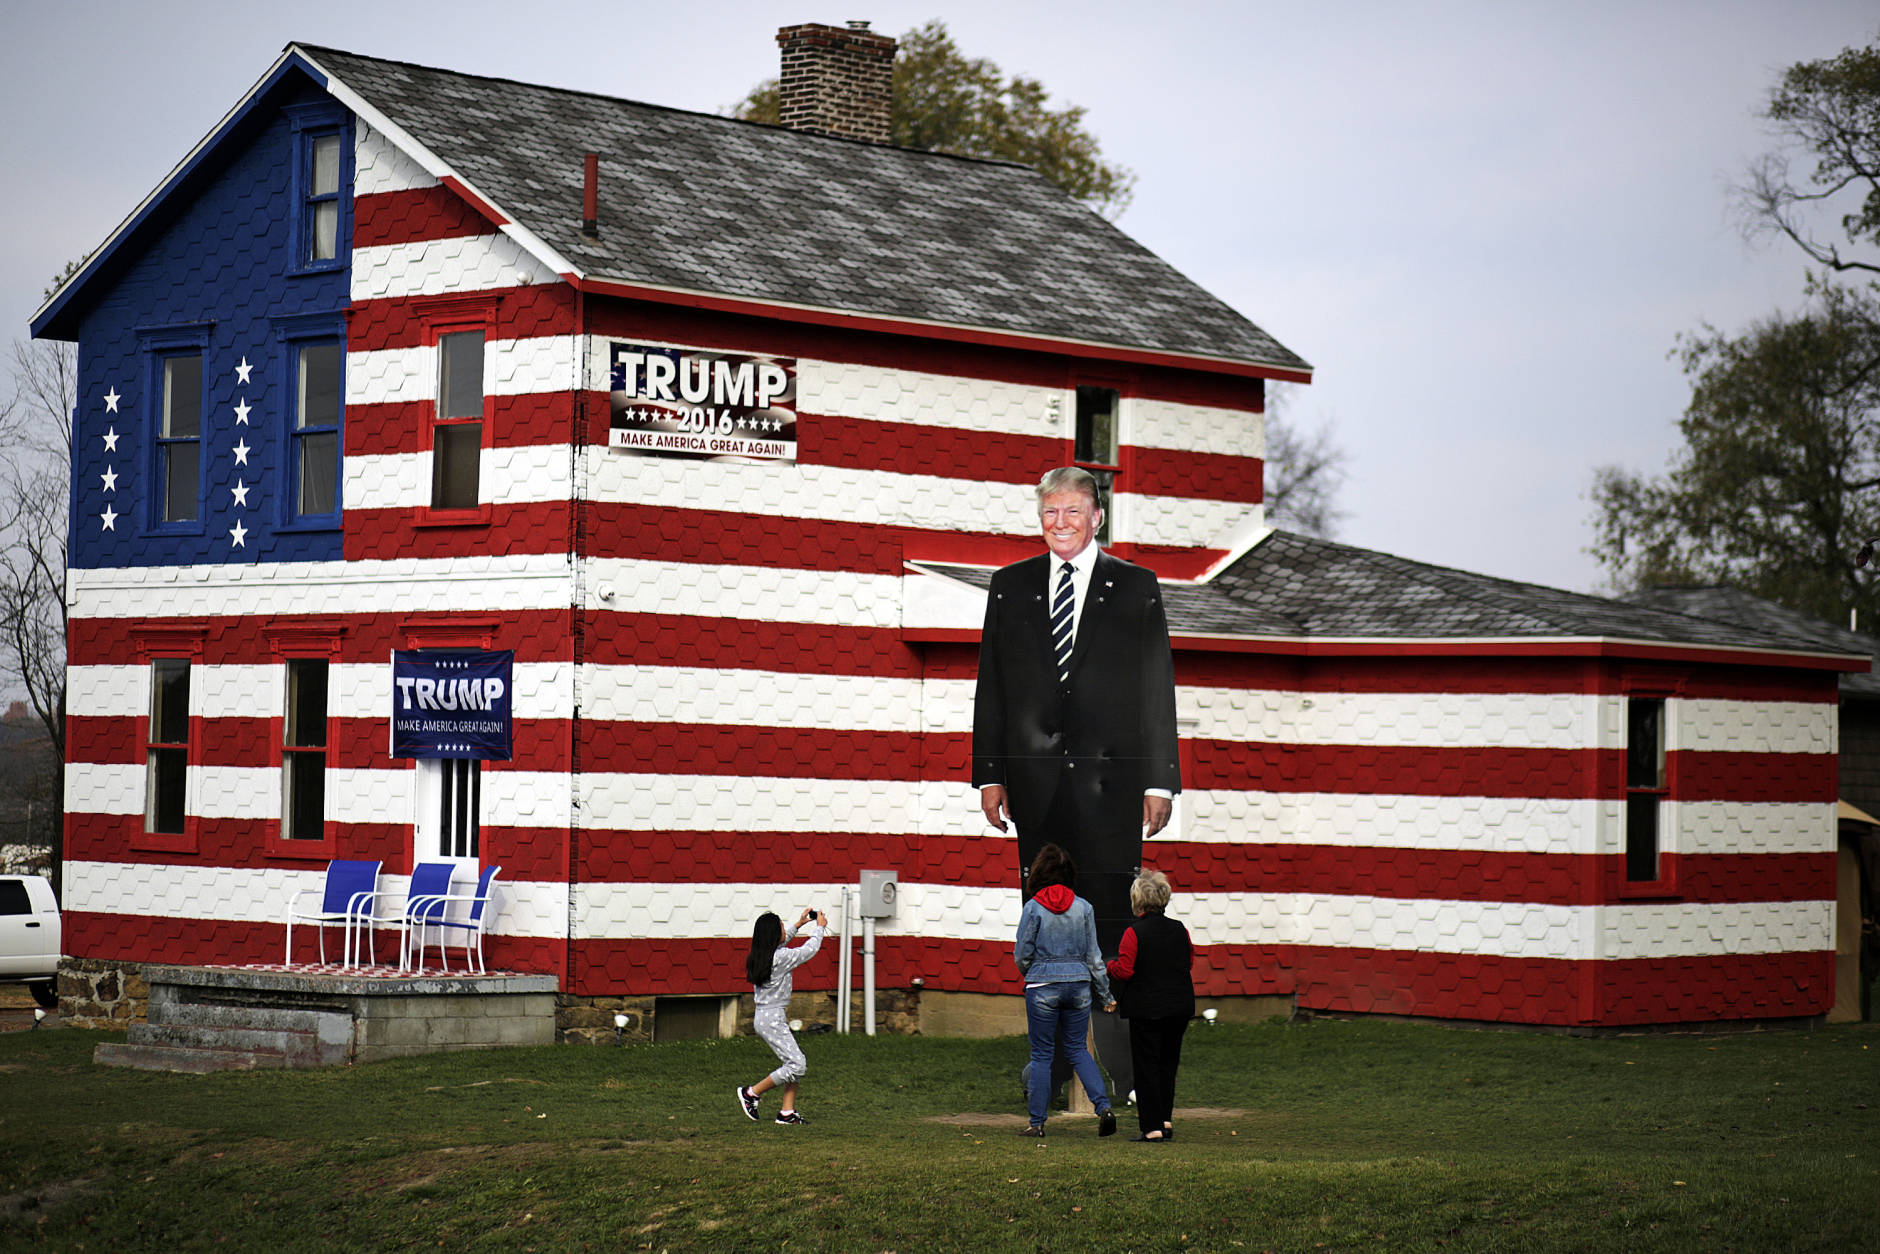 A young visitor takes a photo of a giant cutout of Republican candidate for president Donald Trump in front of the Trump House owned by Lisa Rossi in Youngstown, Pa, Tuesday, Nov. 8, 2016. (AP Photo/Gene J. Puskar)